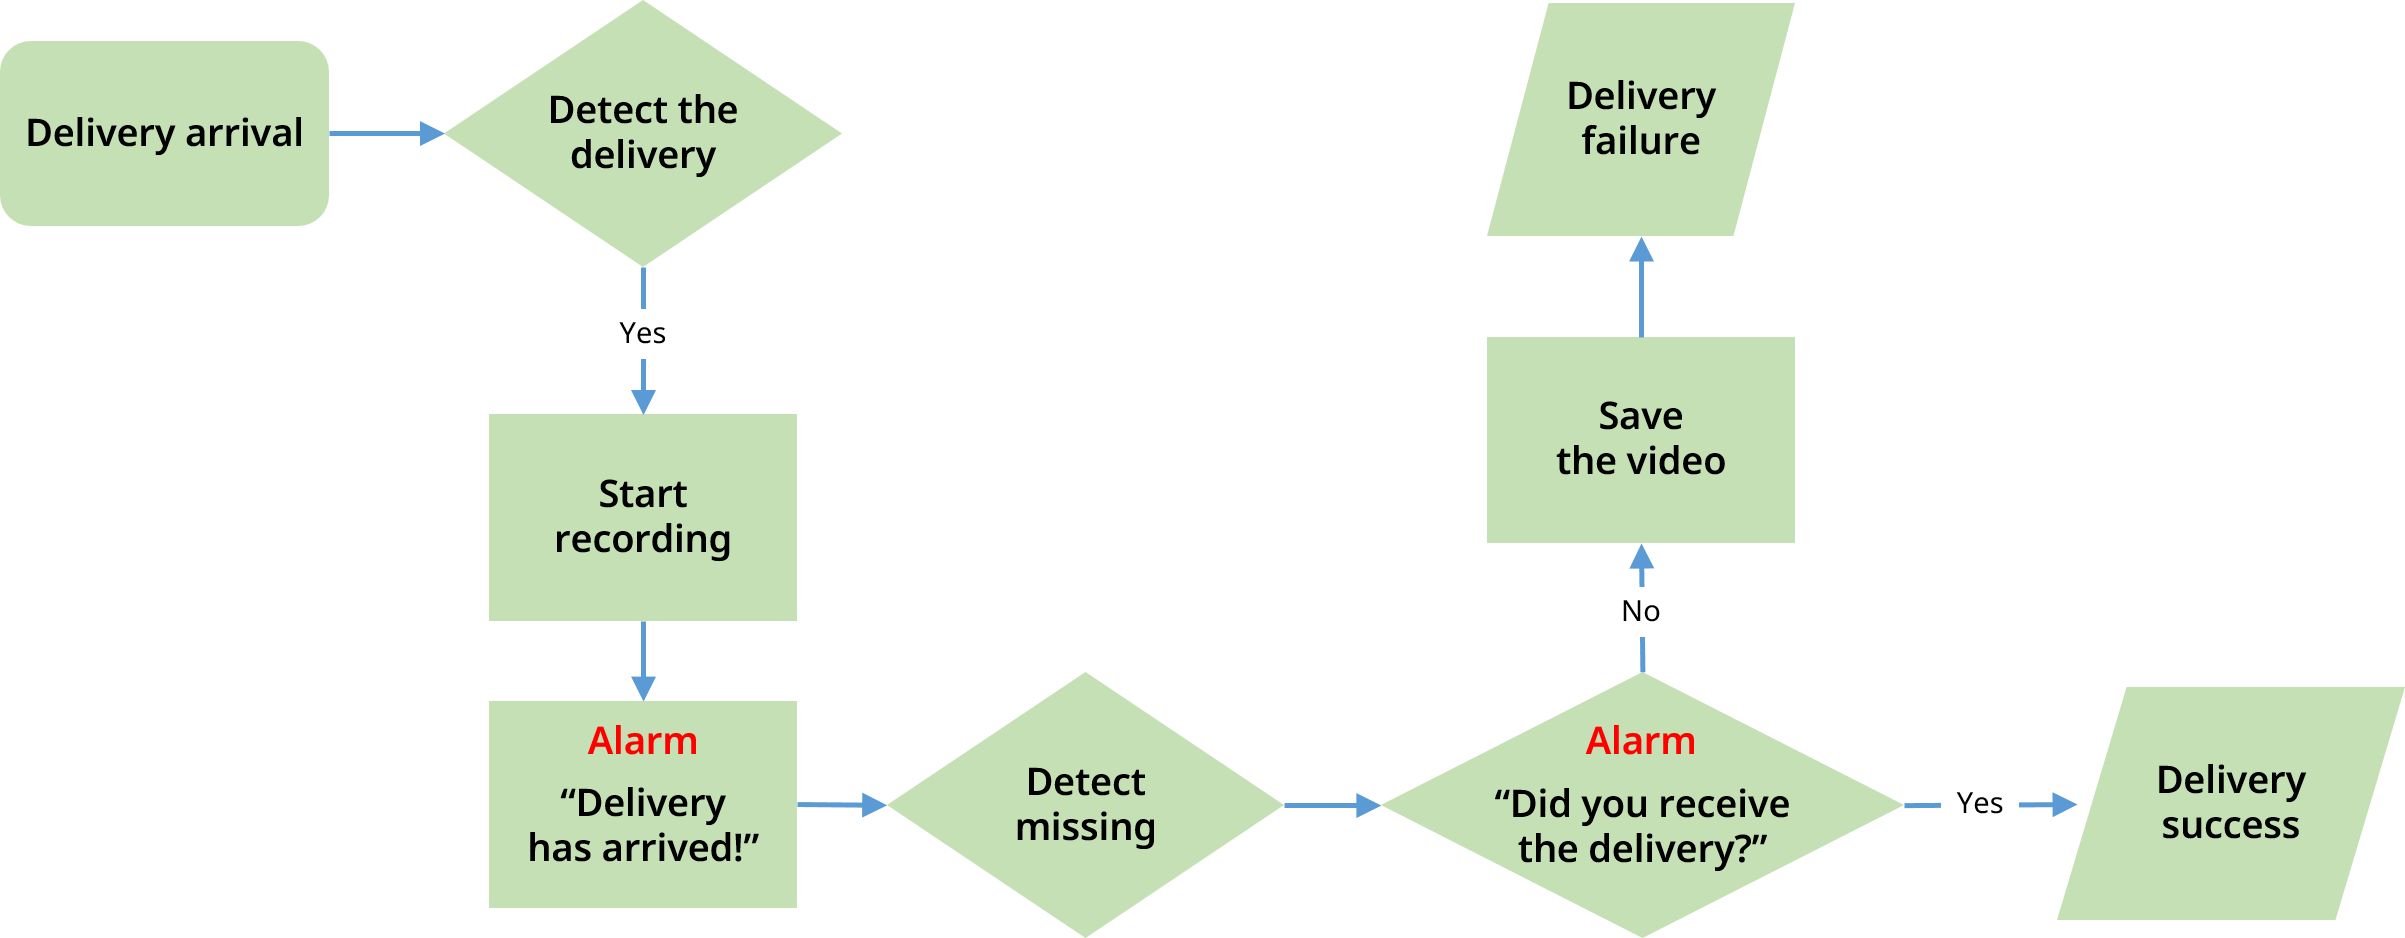 Flowchart of the anti-theft delivery system